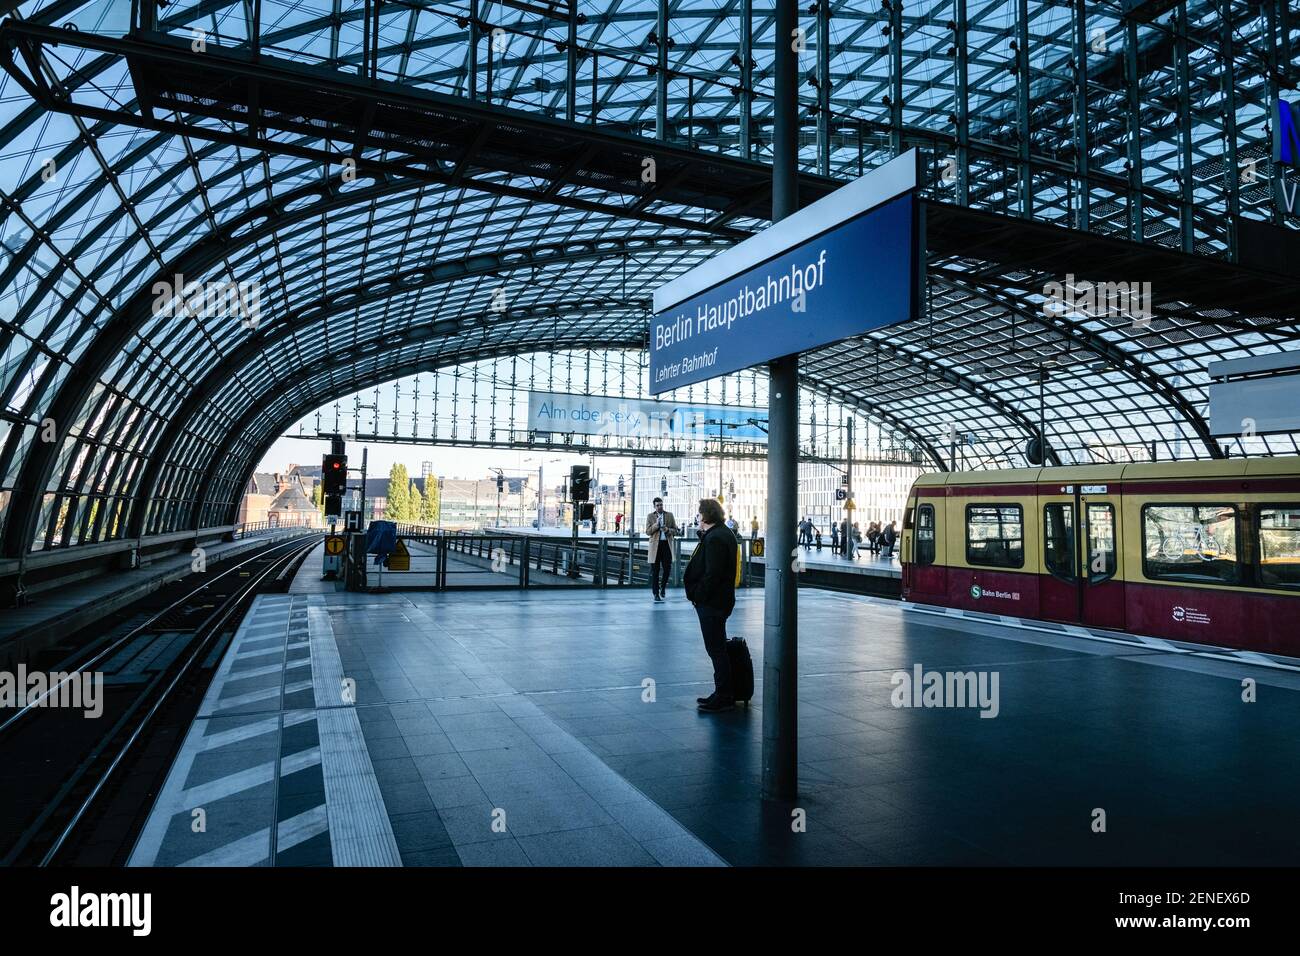 The main railway station in Berlin, capital of Germany. Stock Photo